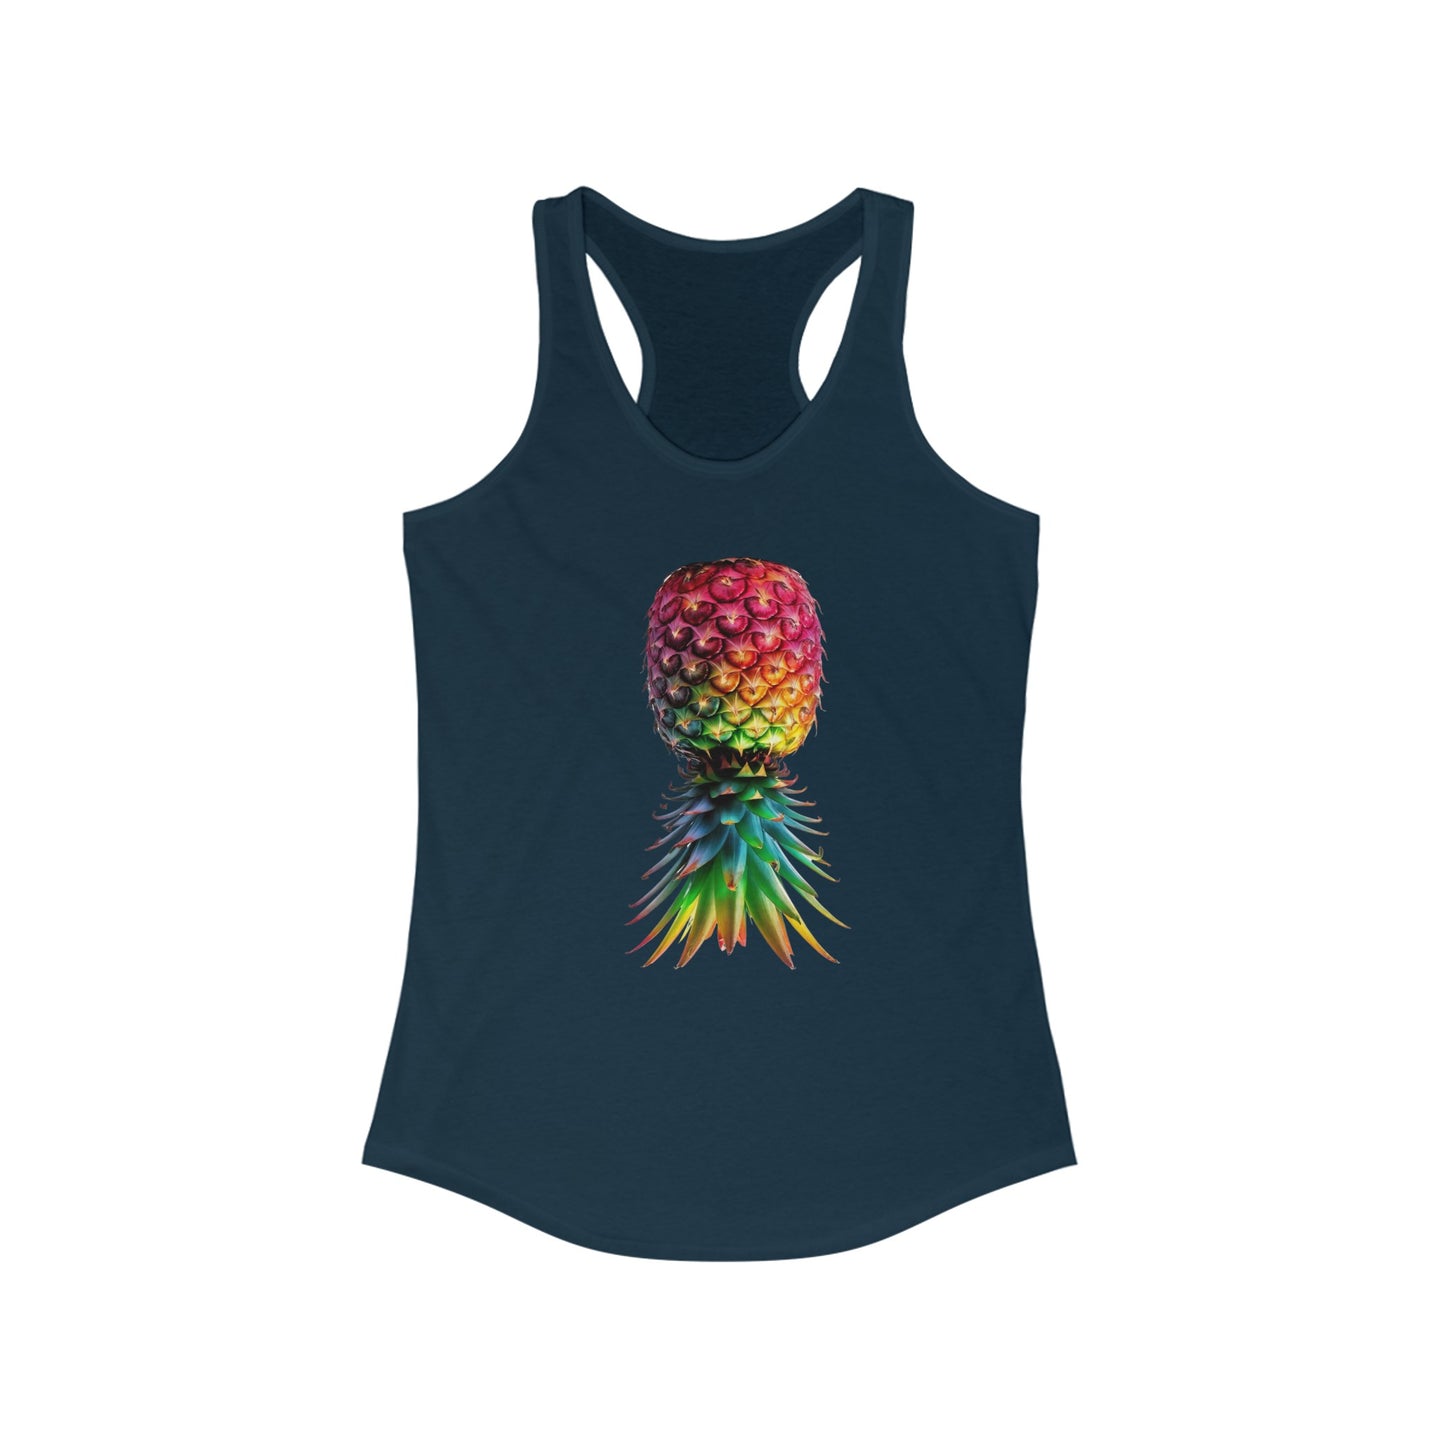 The Stamina for Men Women's Upside-down Pineapple midnight blue Top | QOS front view